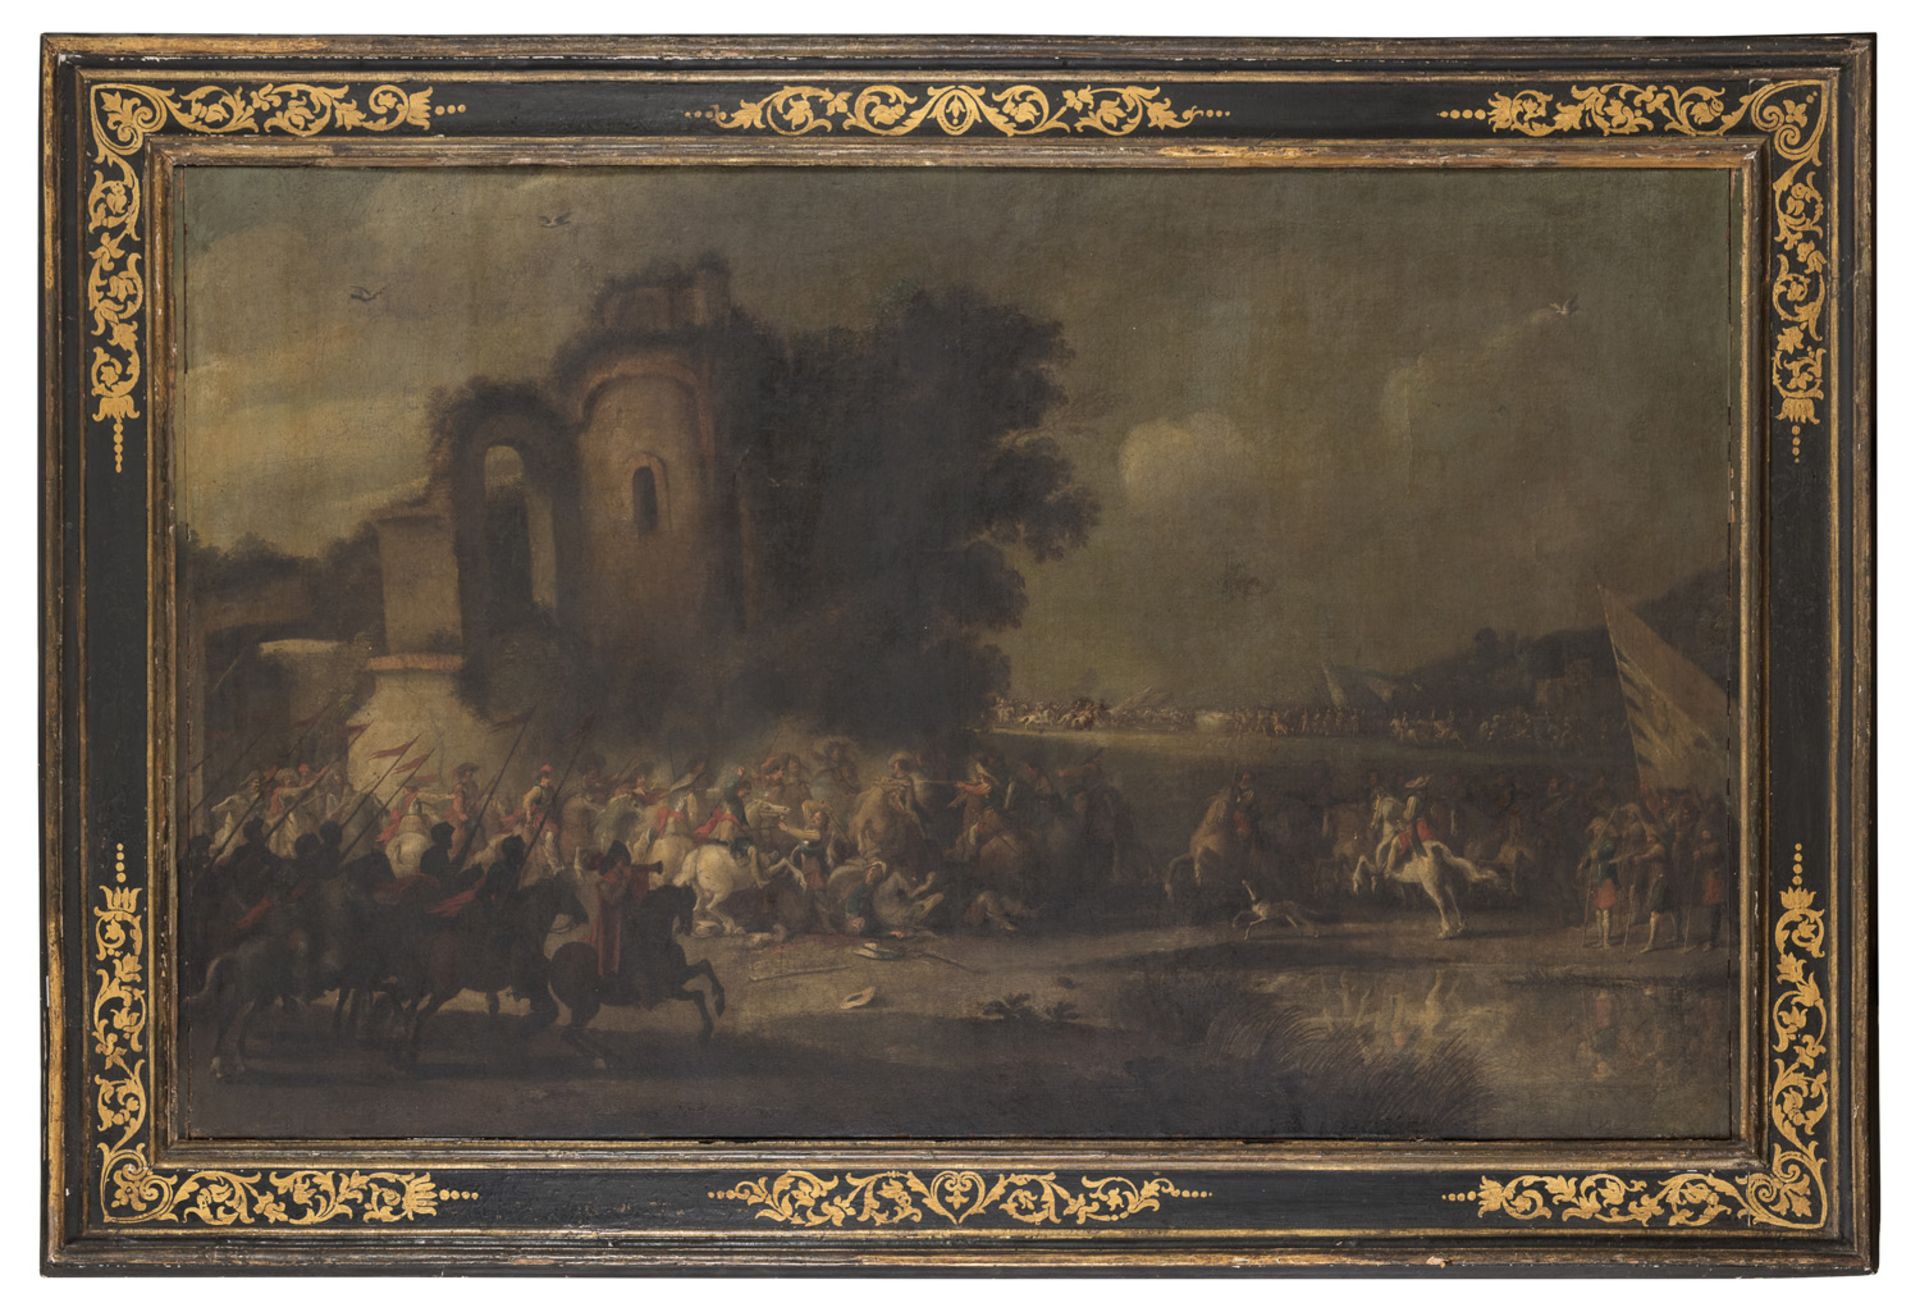 DUTCH OIL PAINTING OF BATTLE BETWEEN CHRISTIAN KNIGHTS 17TH CENTURY